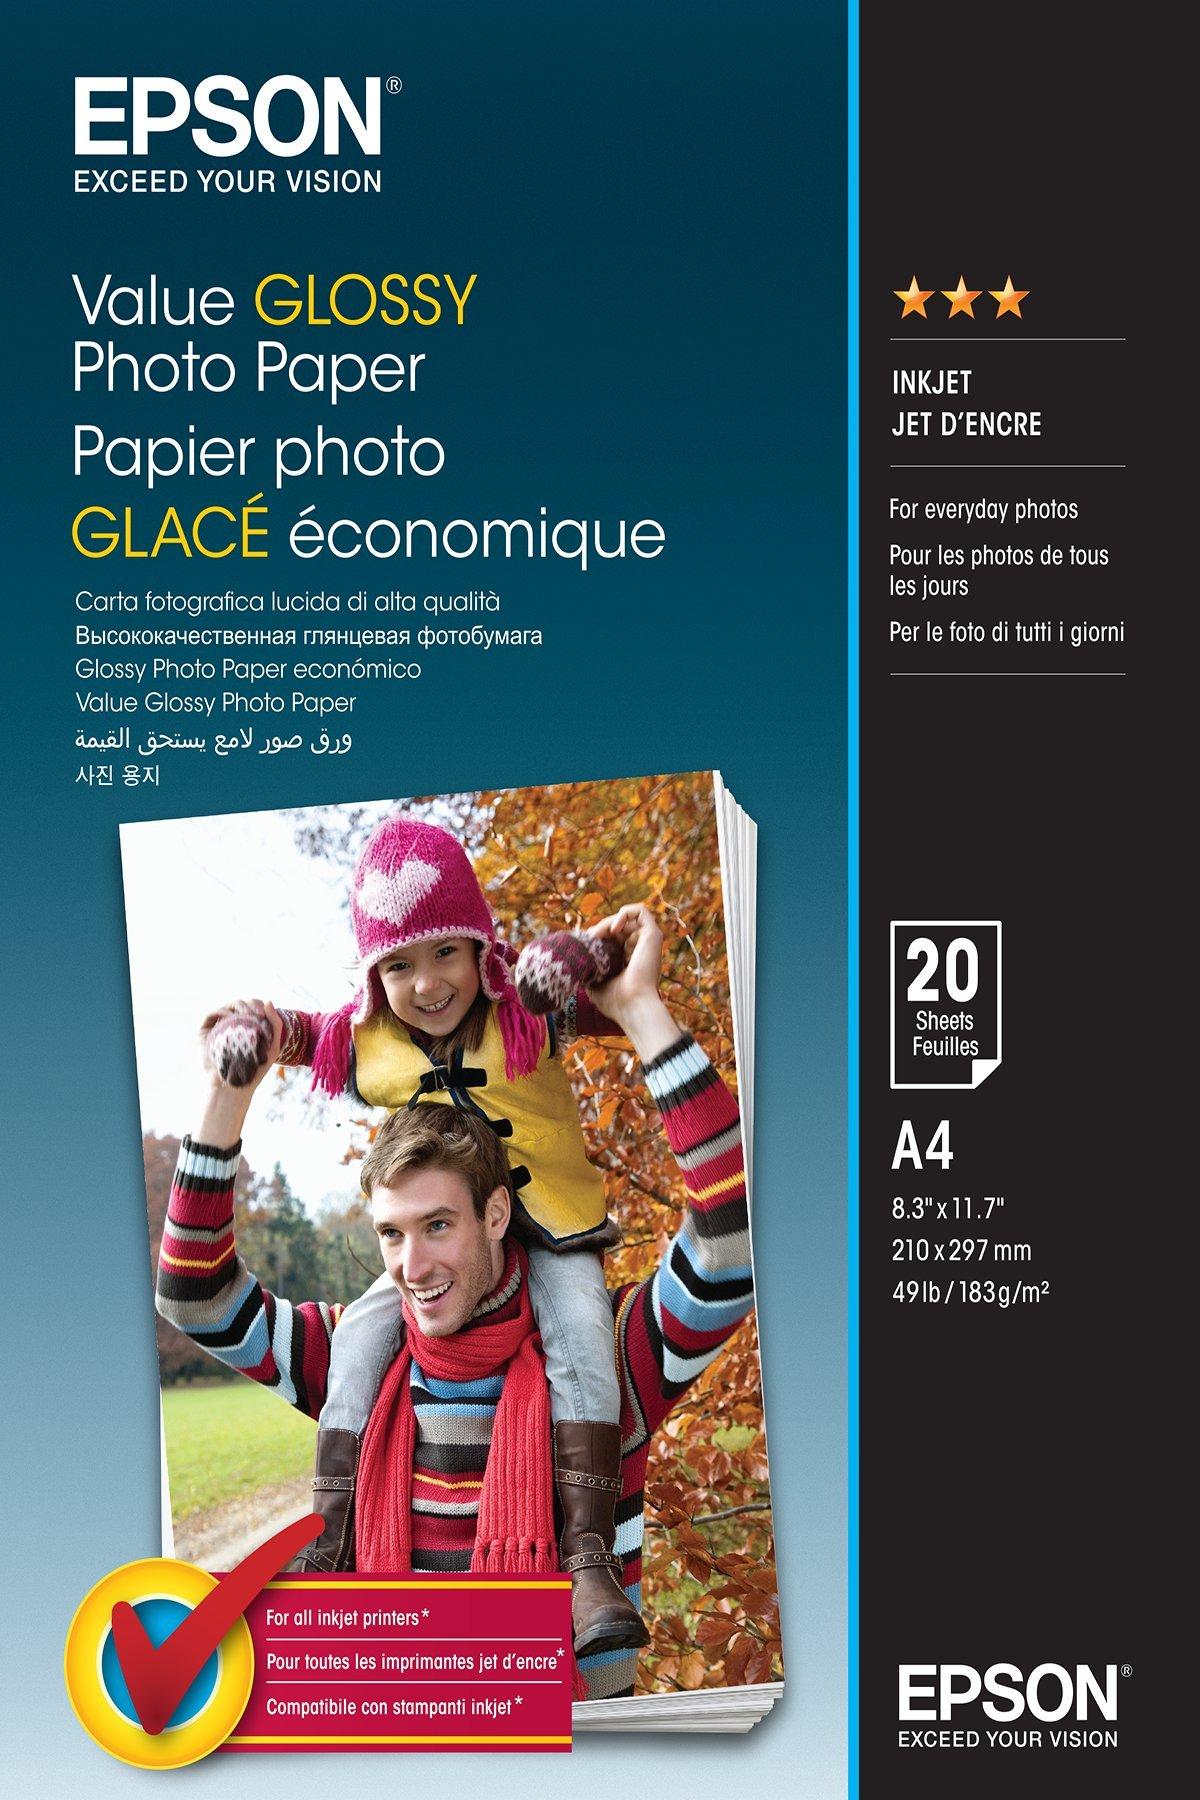 Value Glossy Photo Paper - A4 - 20 sheets, Paper and Media